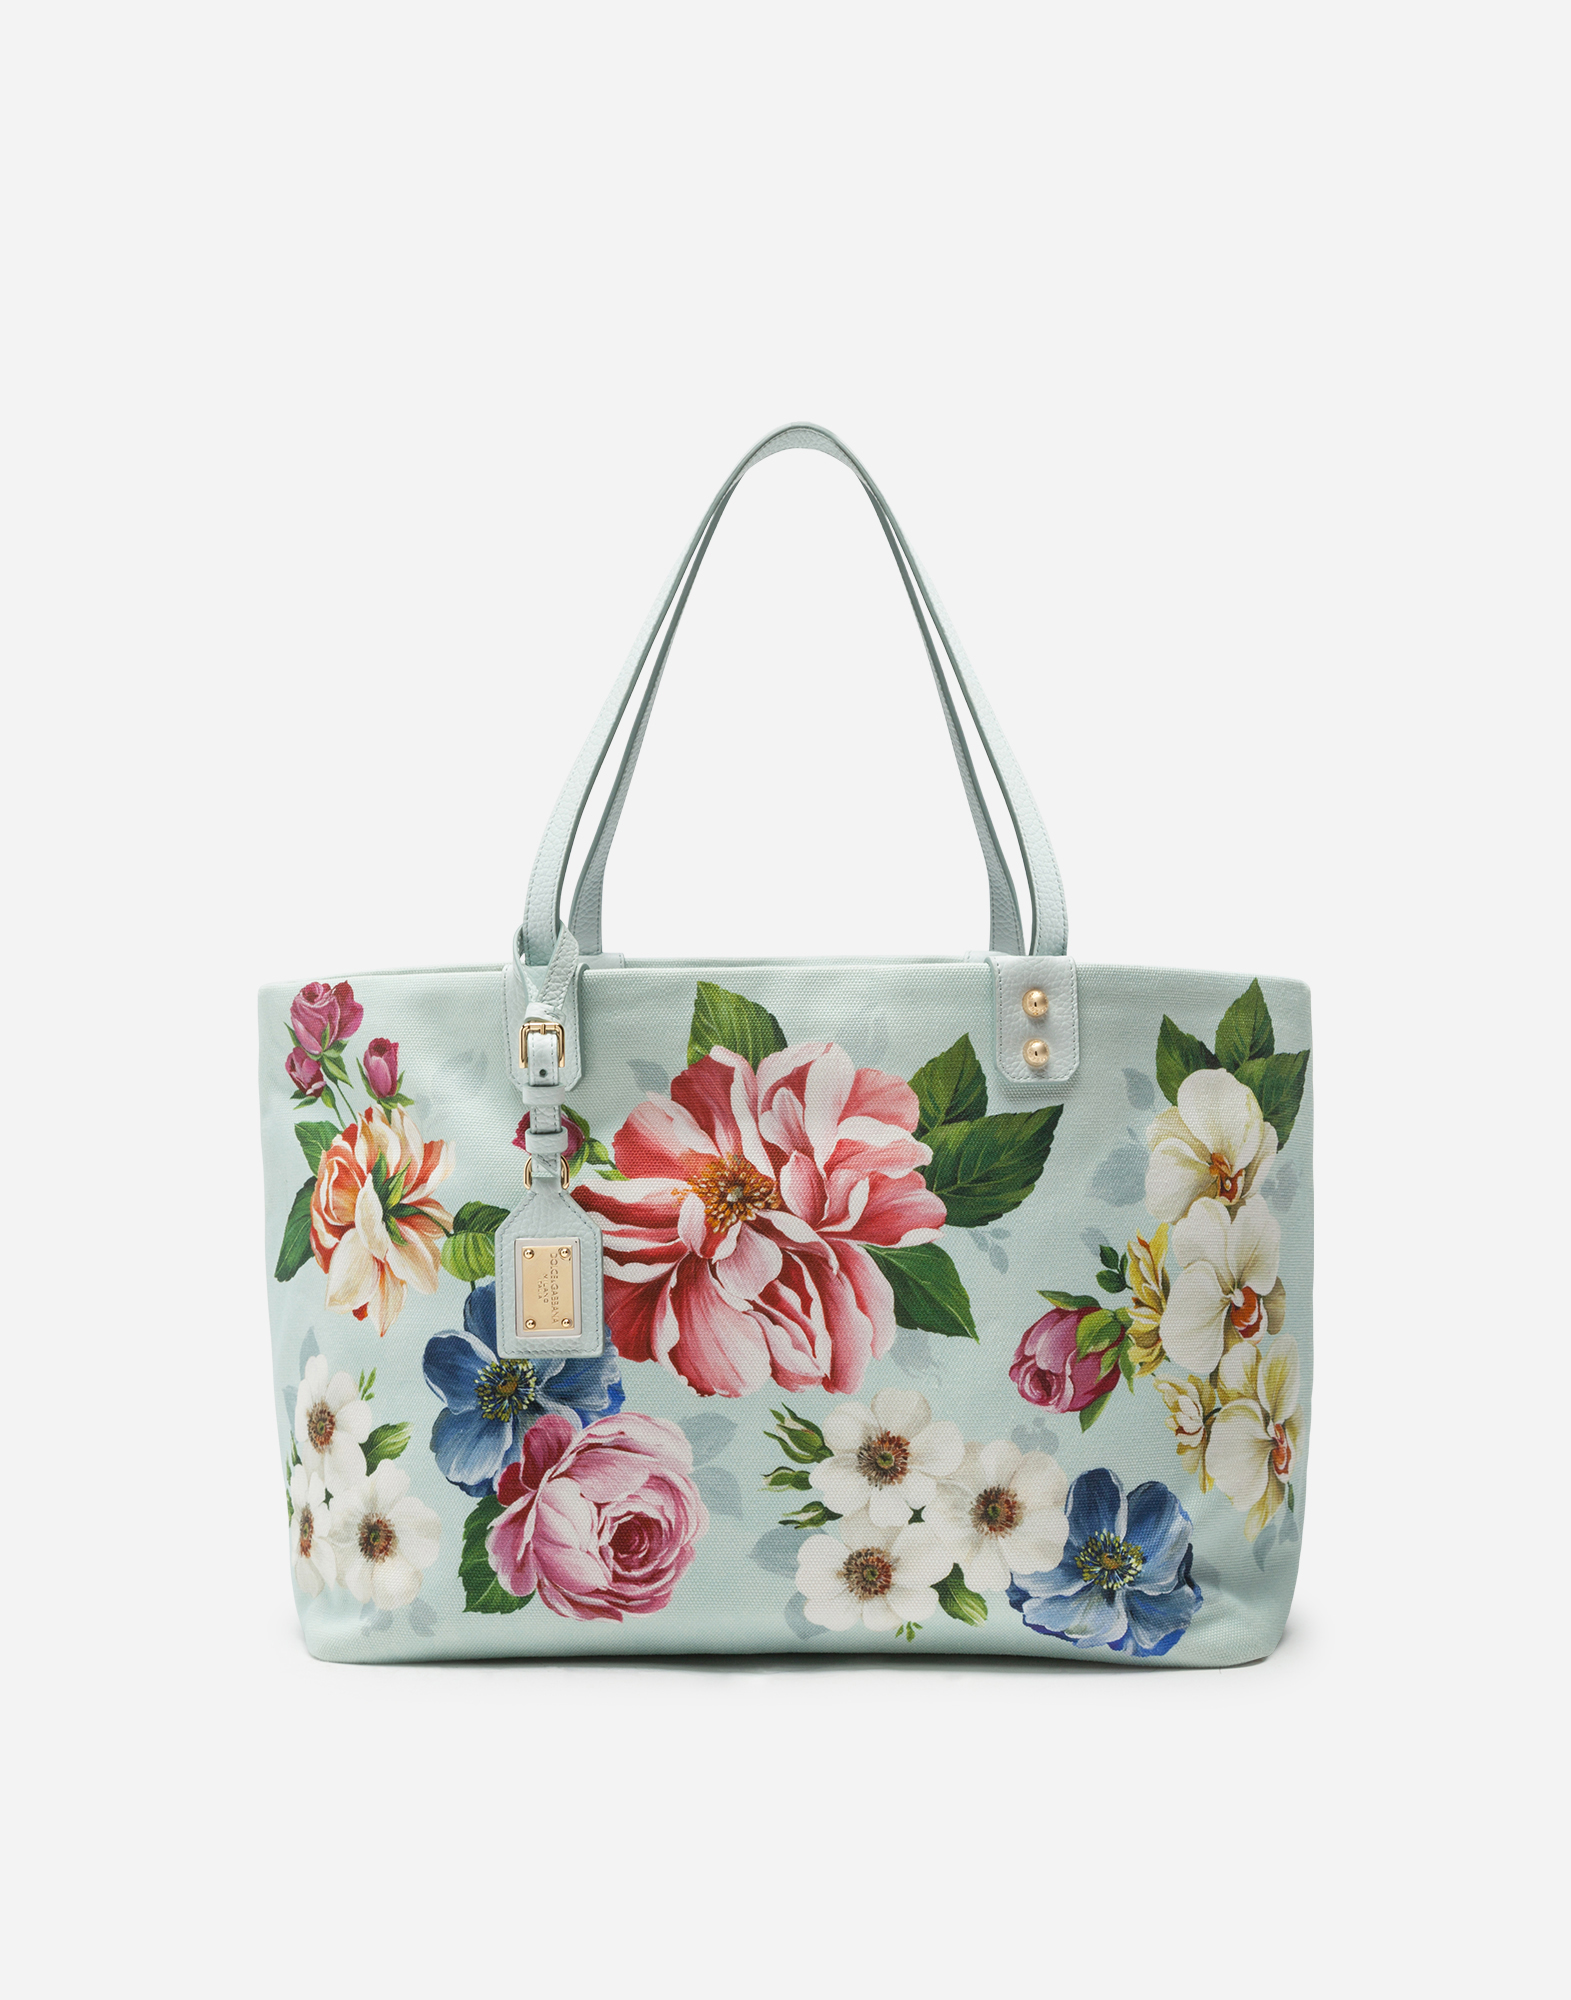 DOLCE & GABBANA MEDIUM BEATRICE SHOPPING BAG IN CANVAS WITH FLORAL OMBRE PRINT